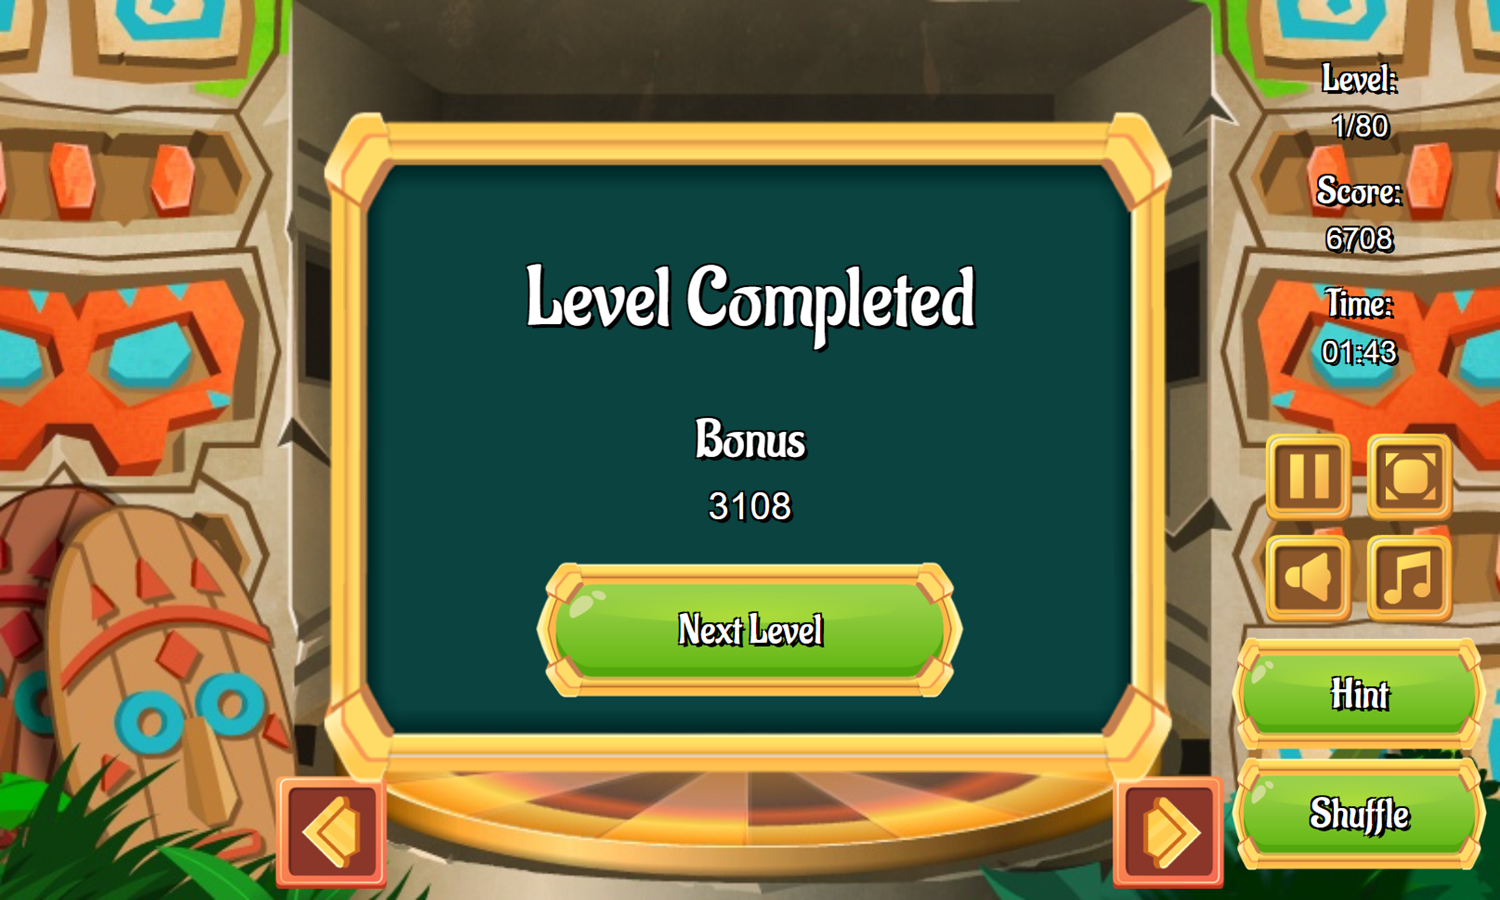 Travelers Quest Game Level Completed Screenshot.